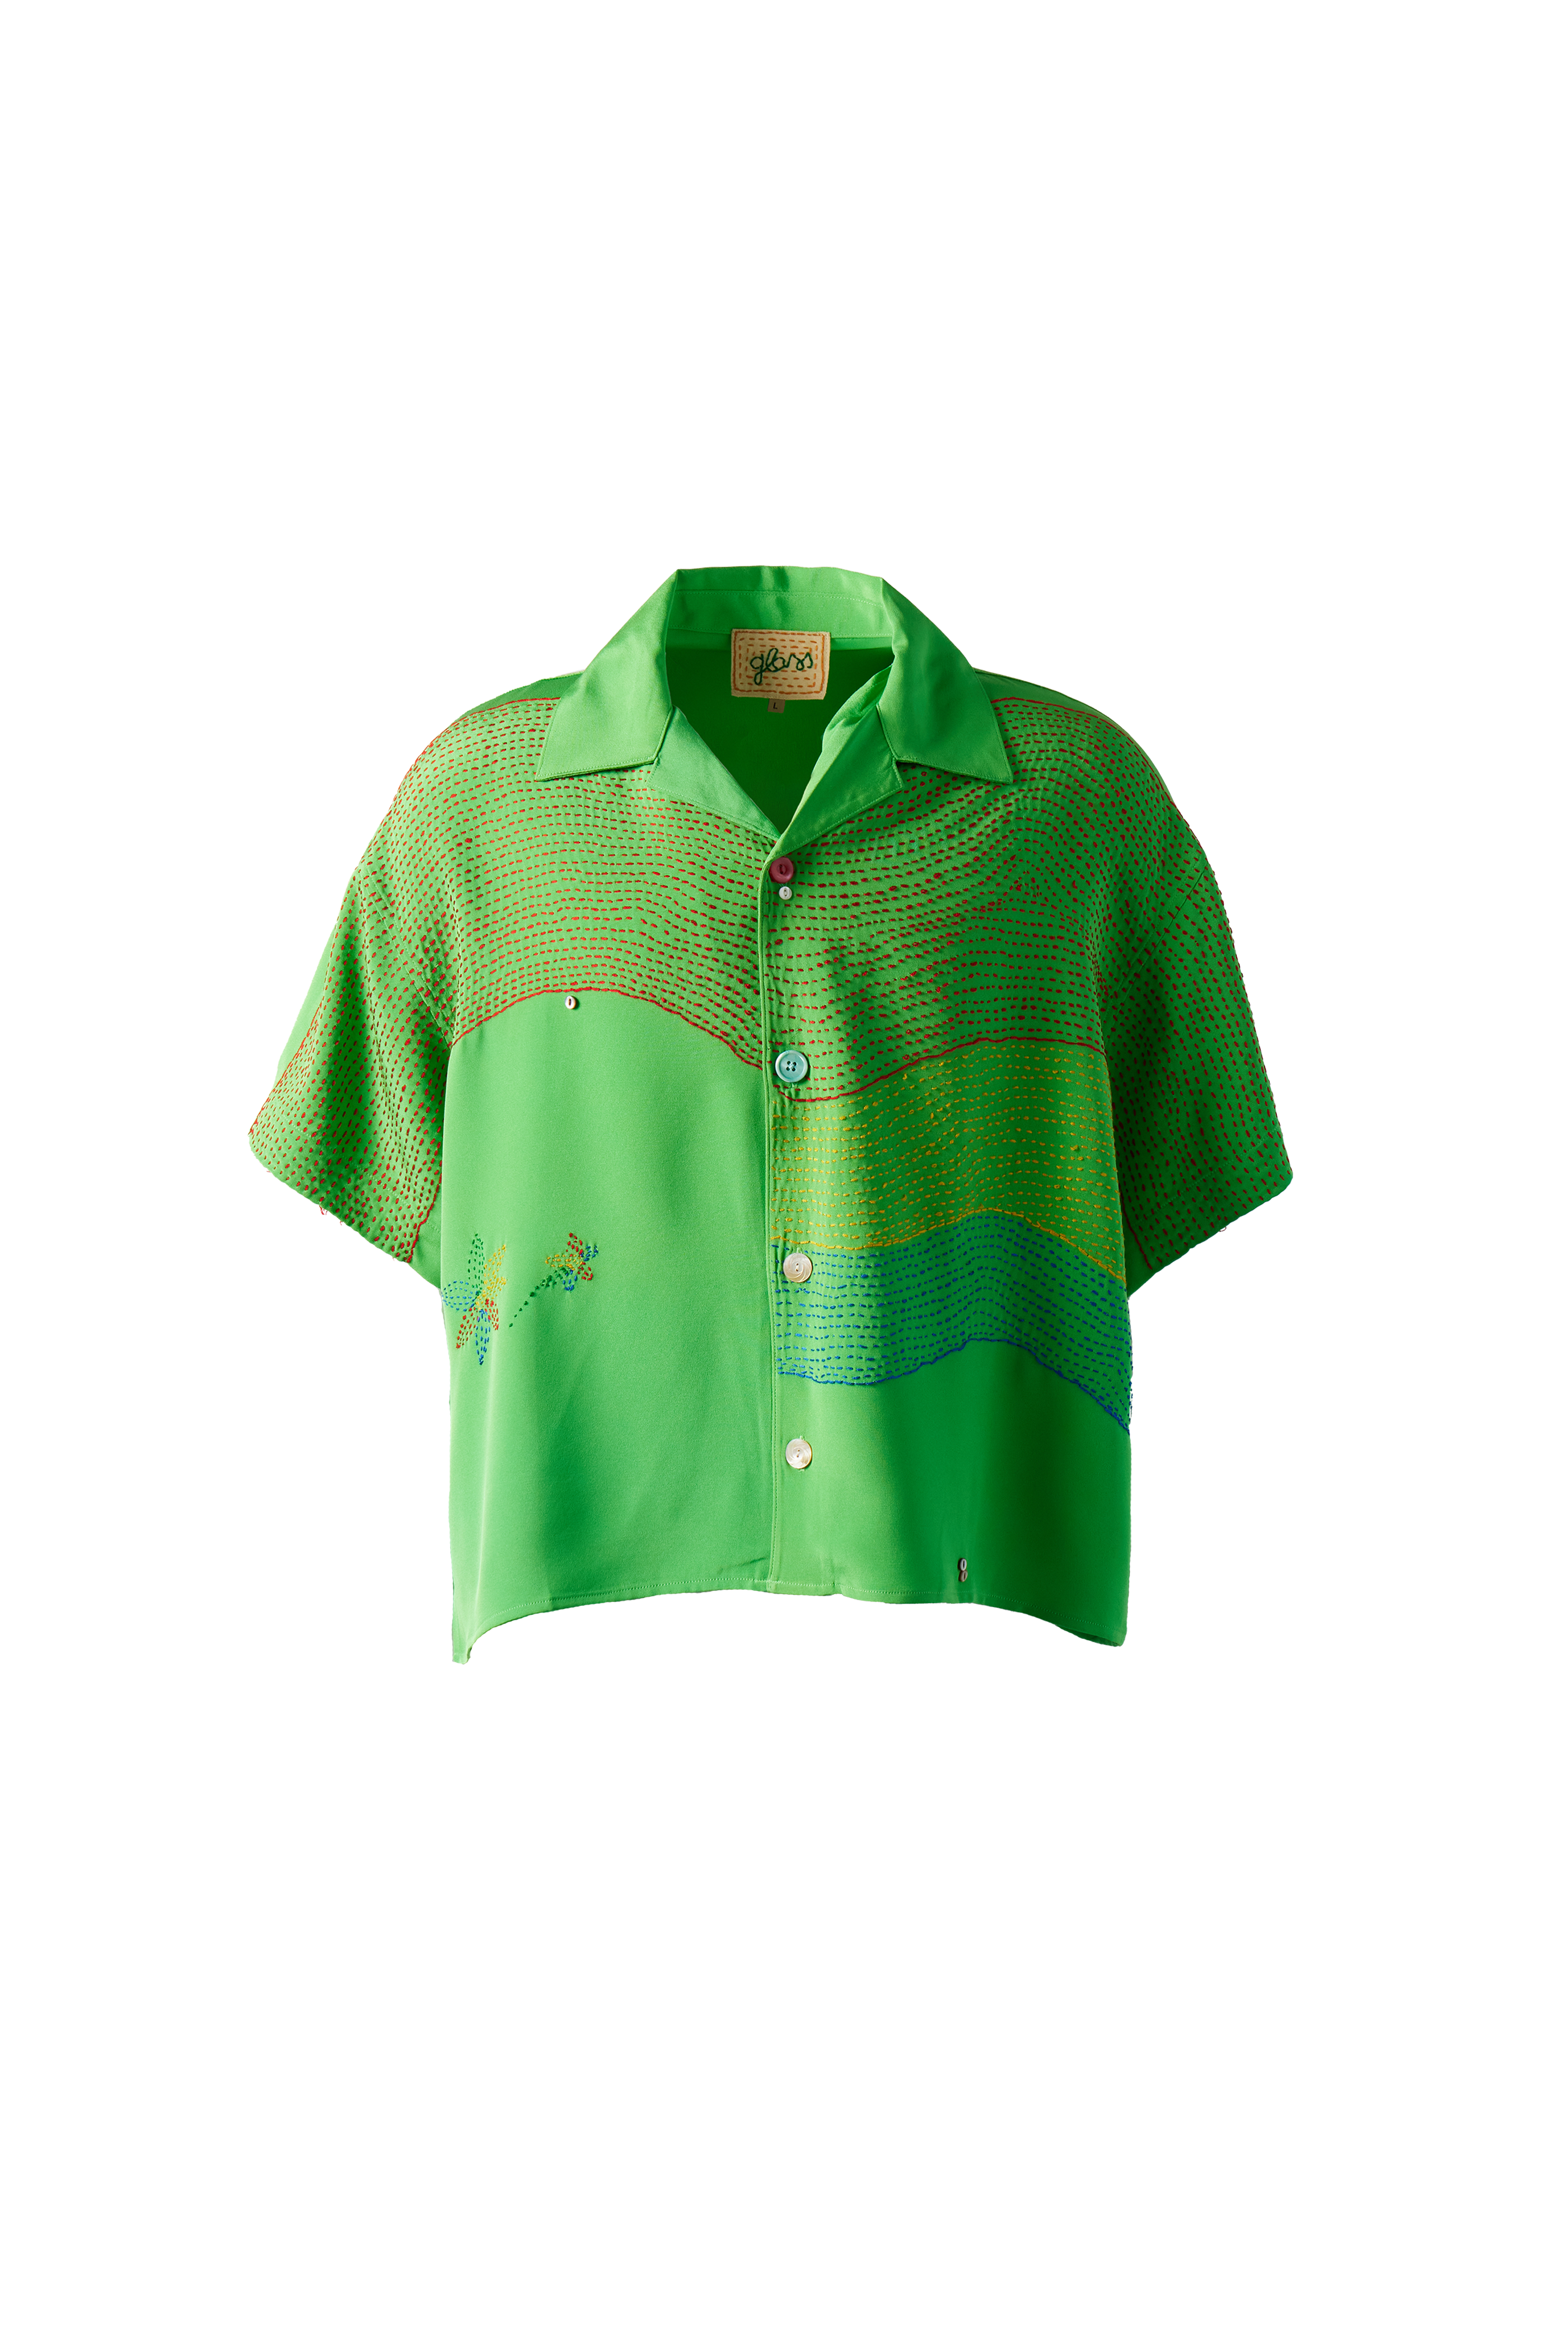 GLASS CYPRESS - Curves Silk Shirt product image